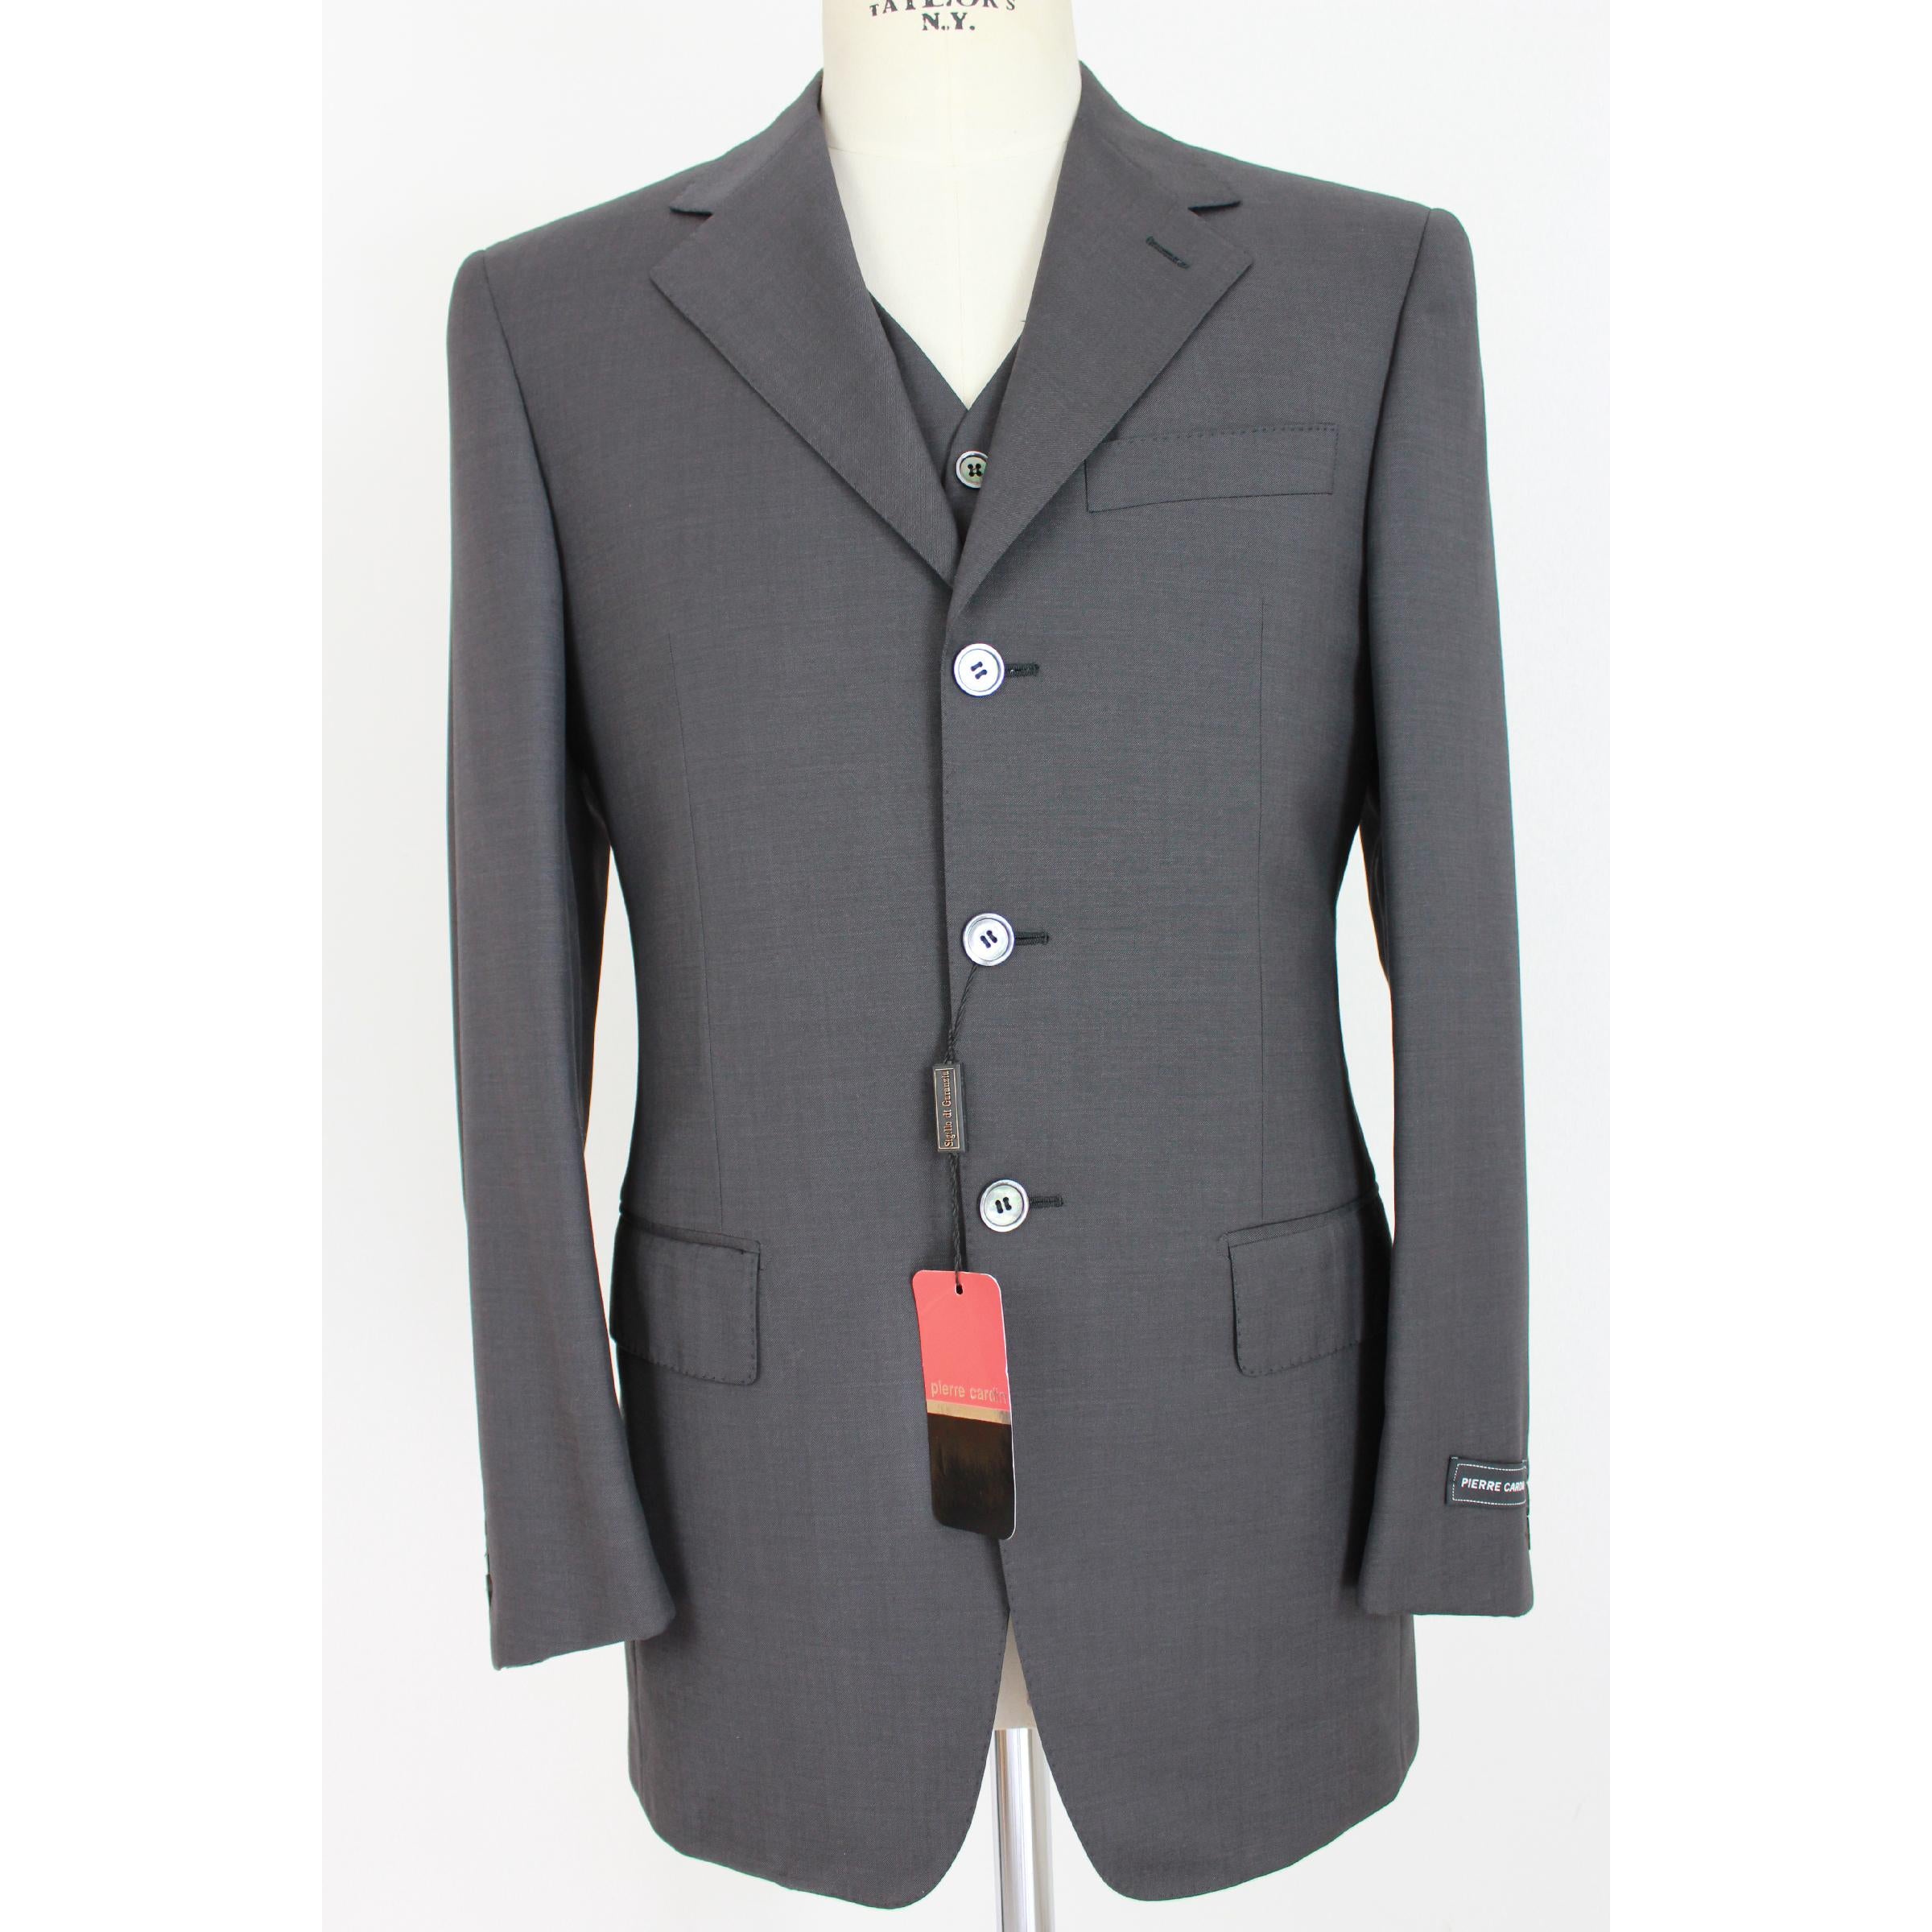 Pierre Cardin ceremony men's pant's suit. Three button complete, gray color, 100% Cerruti family superior wool. Mother of pearl buttons, 1990s. Made in Italy. New with tag. 

Size: 46 It 36 Us 36 Uk 

Shoulder: 46 cm 
Bust / Chest: 52 cm 
Sleeve: 62